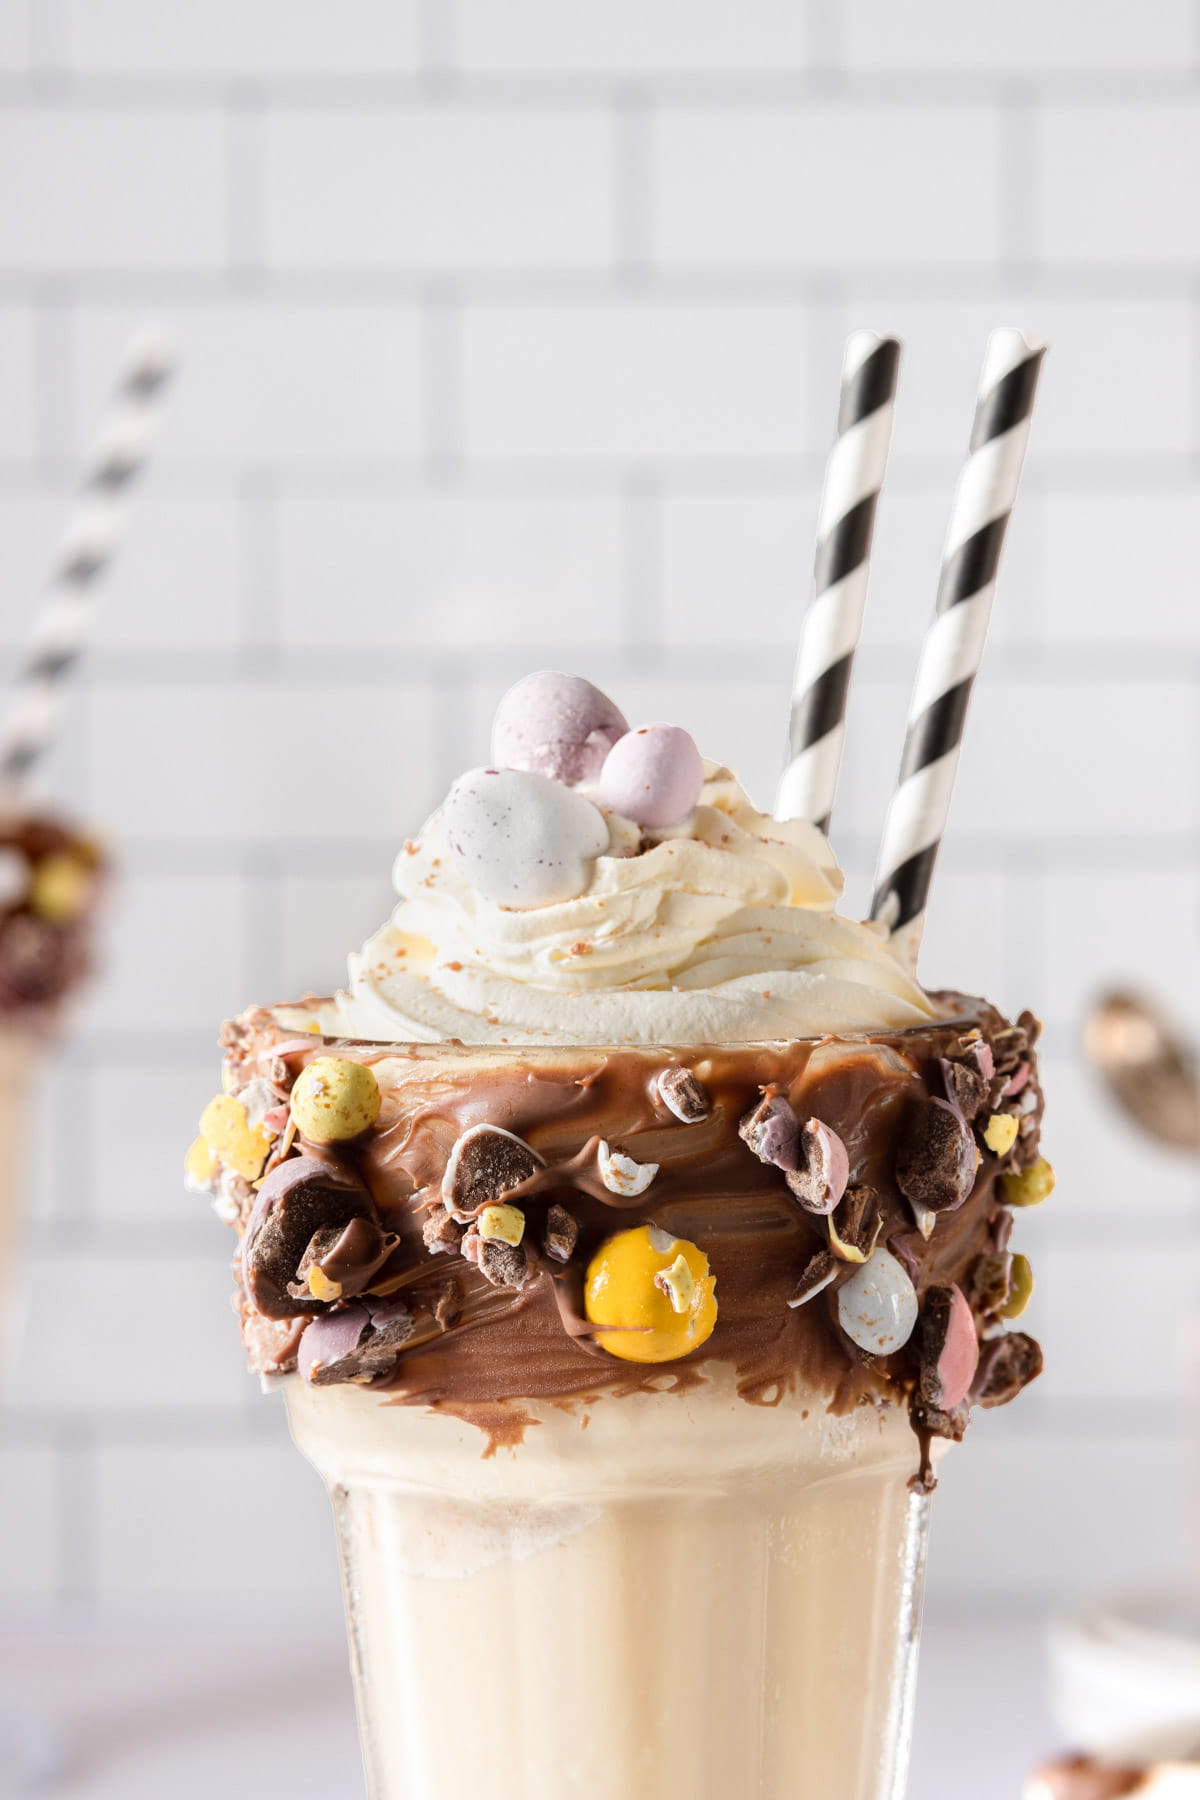 Whipped cream on top of a milkshake glass, coated in chocolate and dipped in crushed chocolate eggs